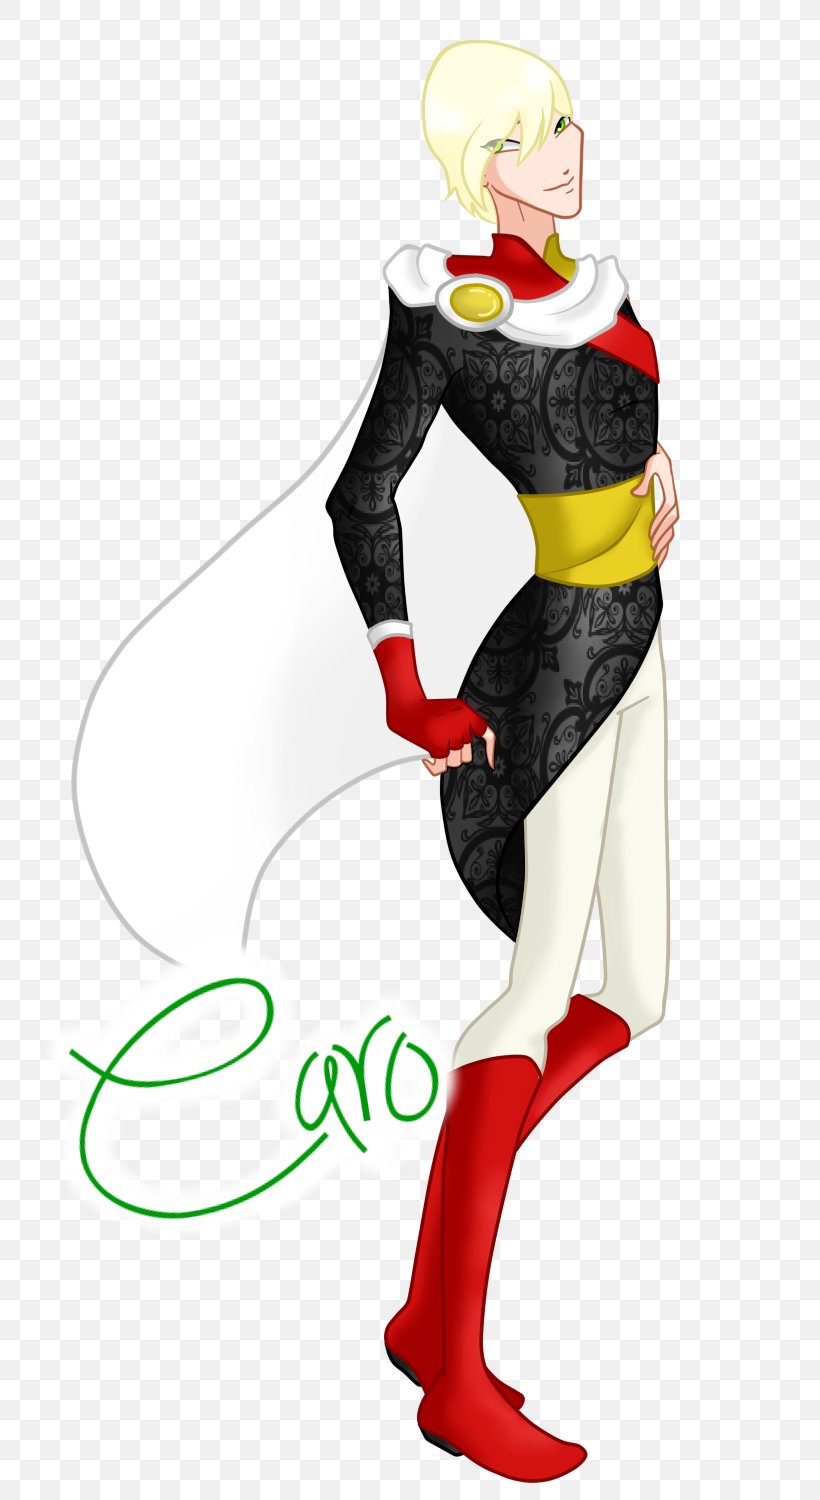 Superhero Christmas Costume Clip Art, PNG, 810x1500px, Superhero, Christmas, Costume, Costume Design, Fictional Character Download Free